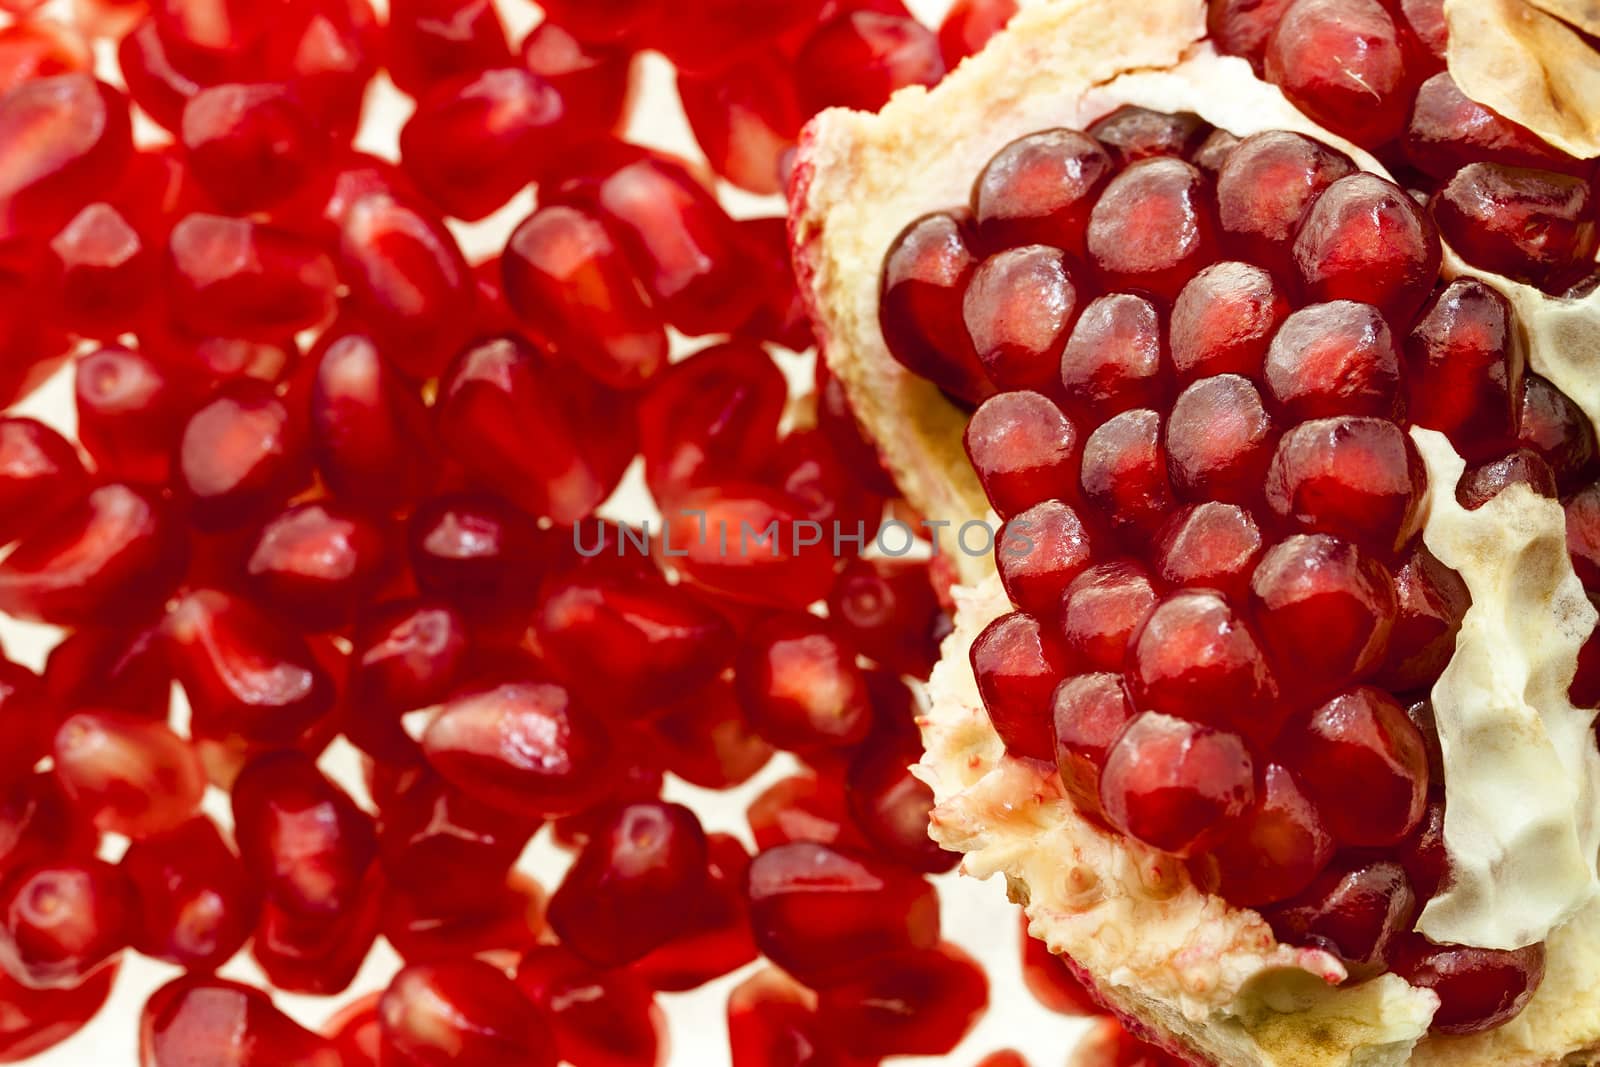   photographed by a close up opened red mature pomegranate